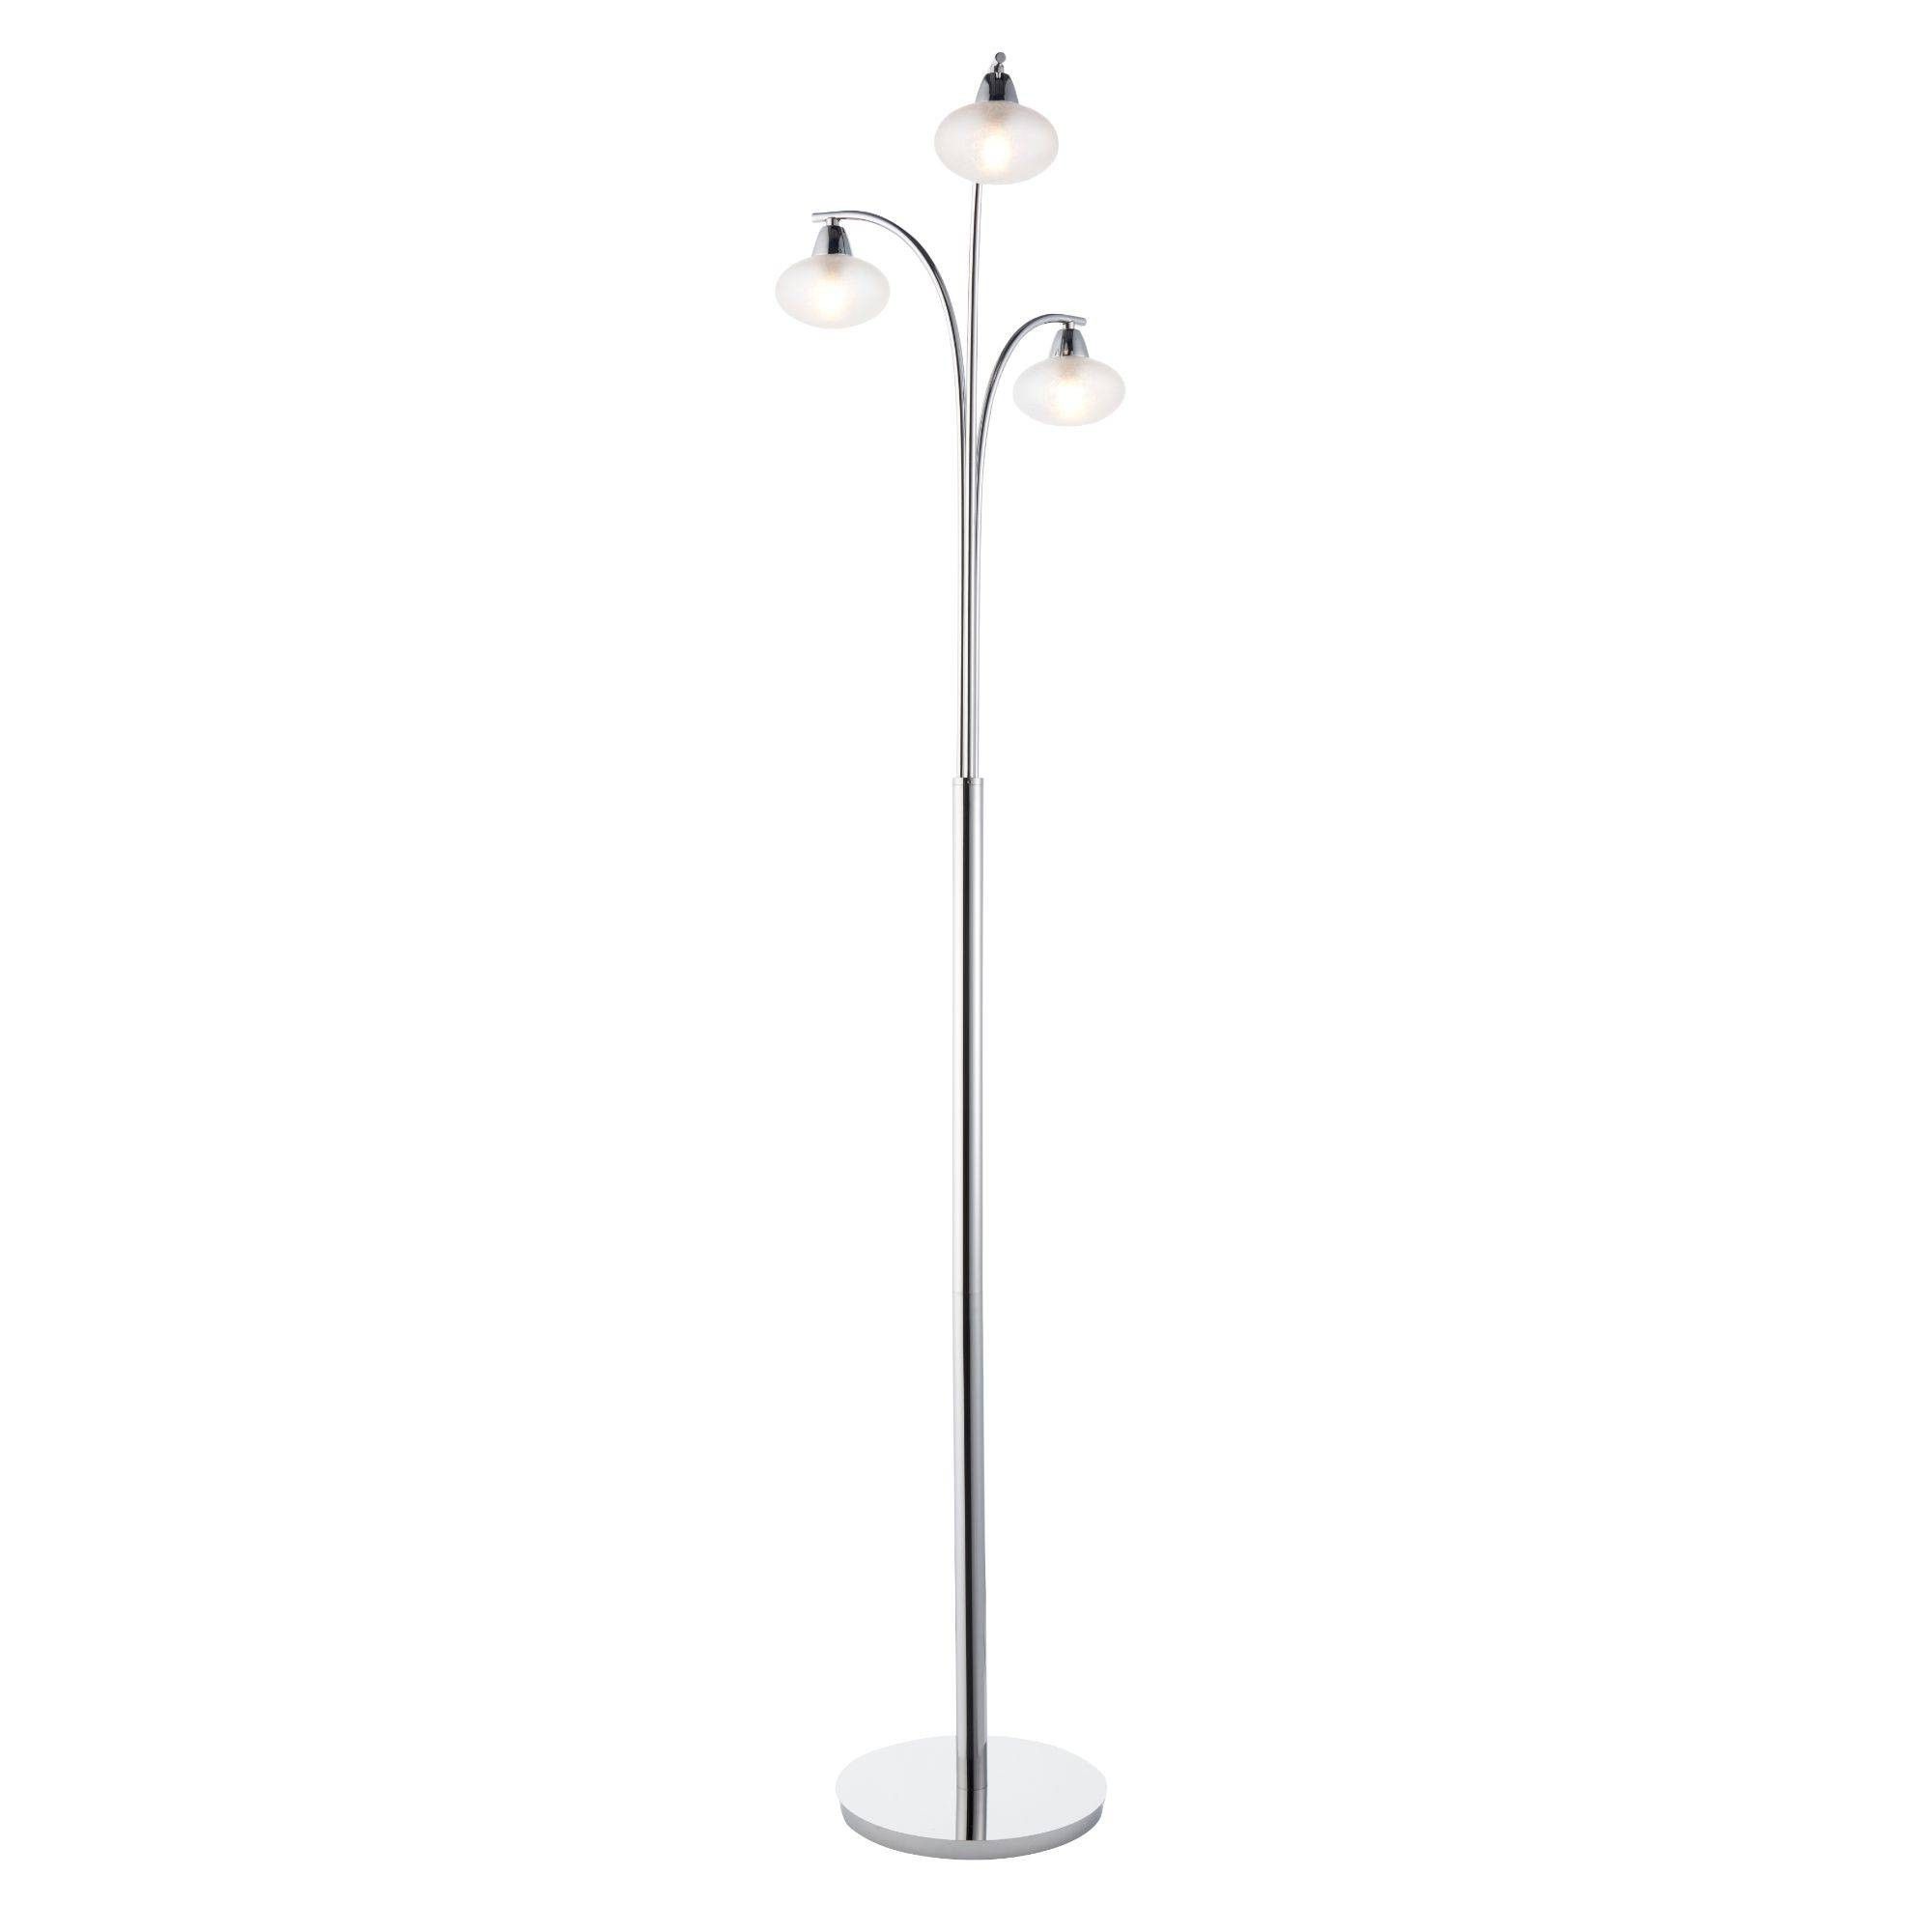 Sion 3 Light 160cm Polished Chrome Floor Lamp With Frosted Glass Shade |  Pagazzi Lighting Intended For Frosted Glass Floor Lamps (View 9 of 20)